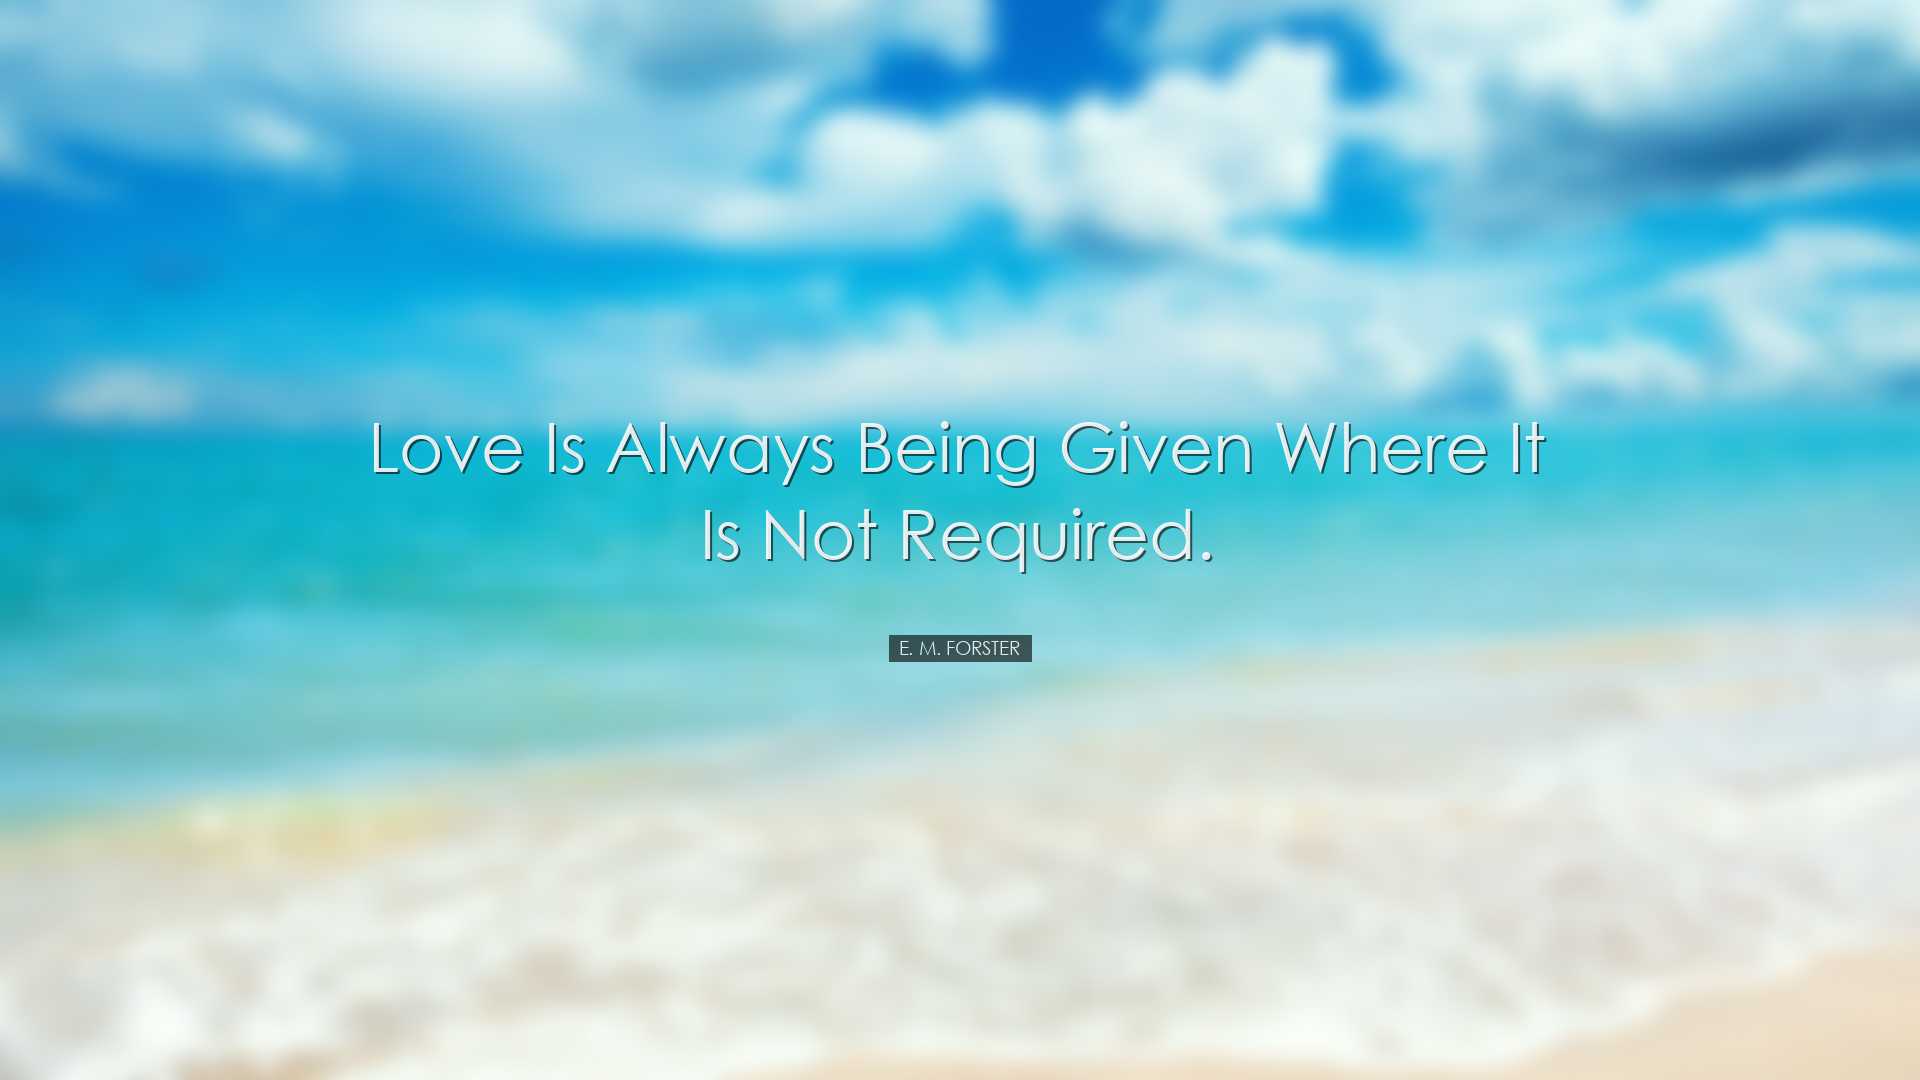 Love is always being given where it is not required. - E. M. Forst